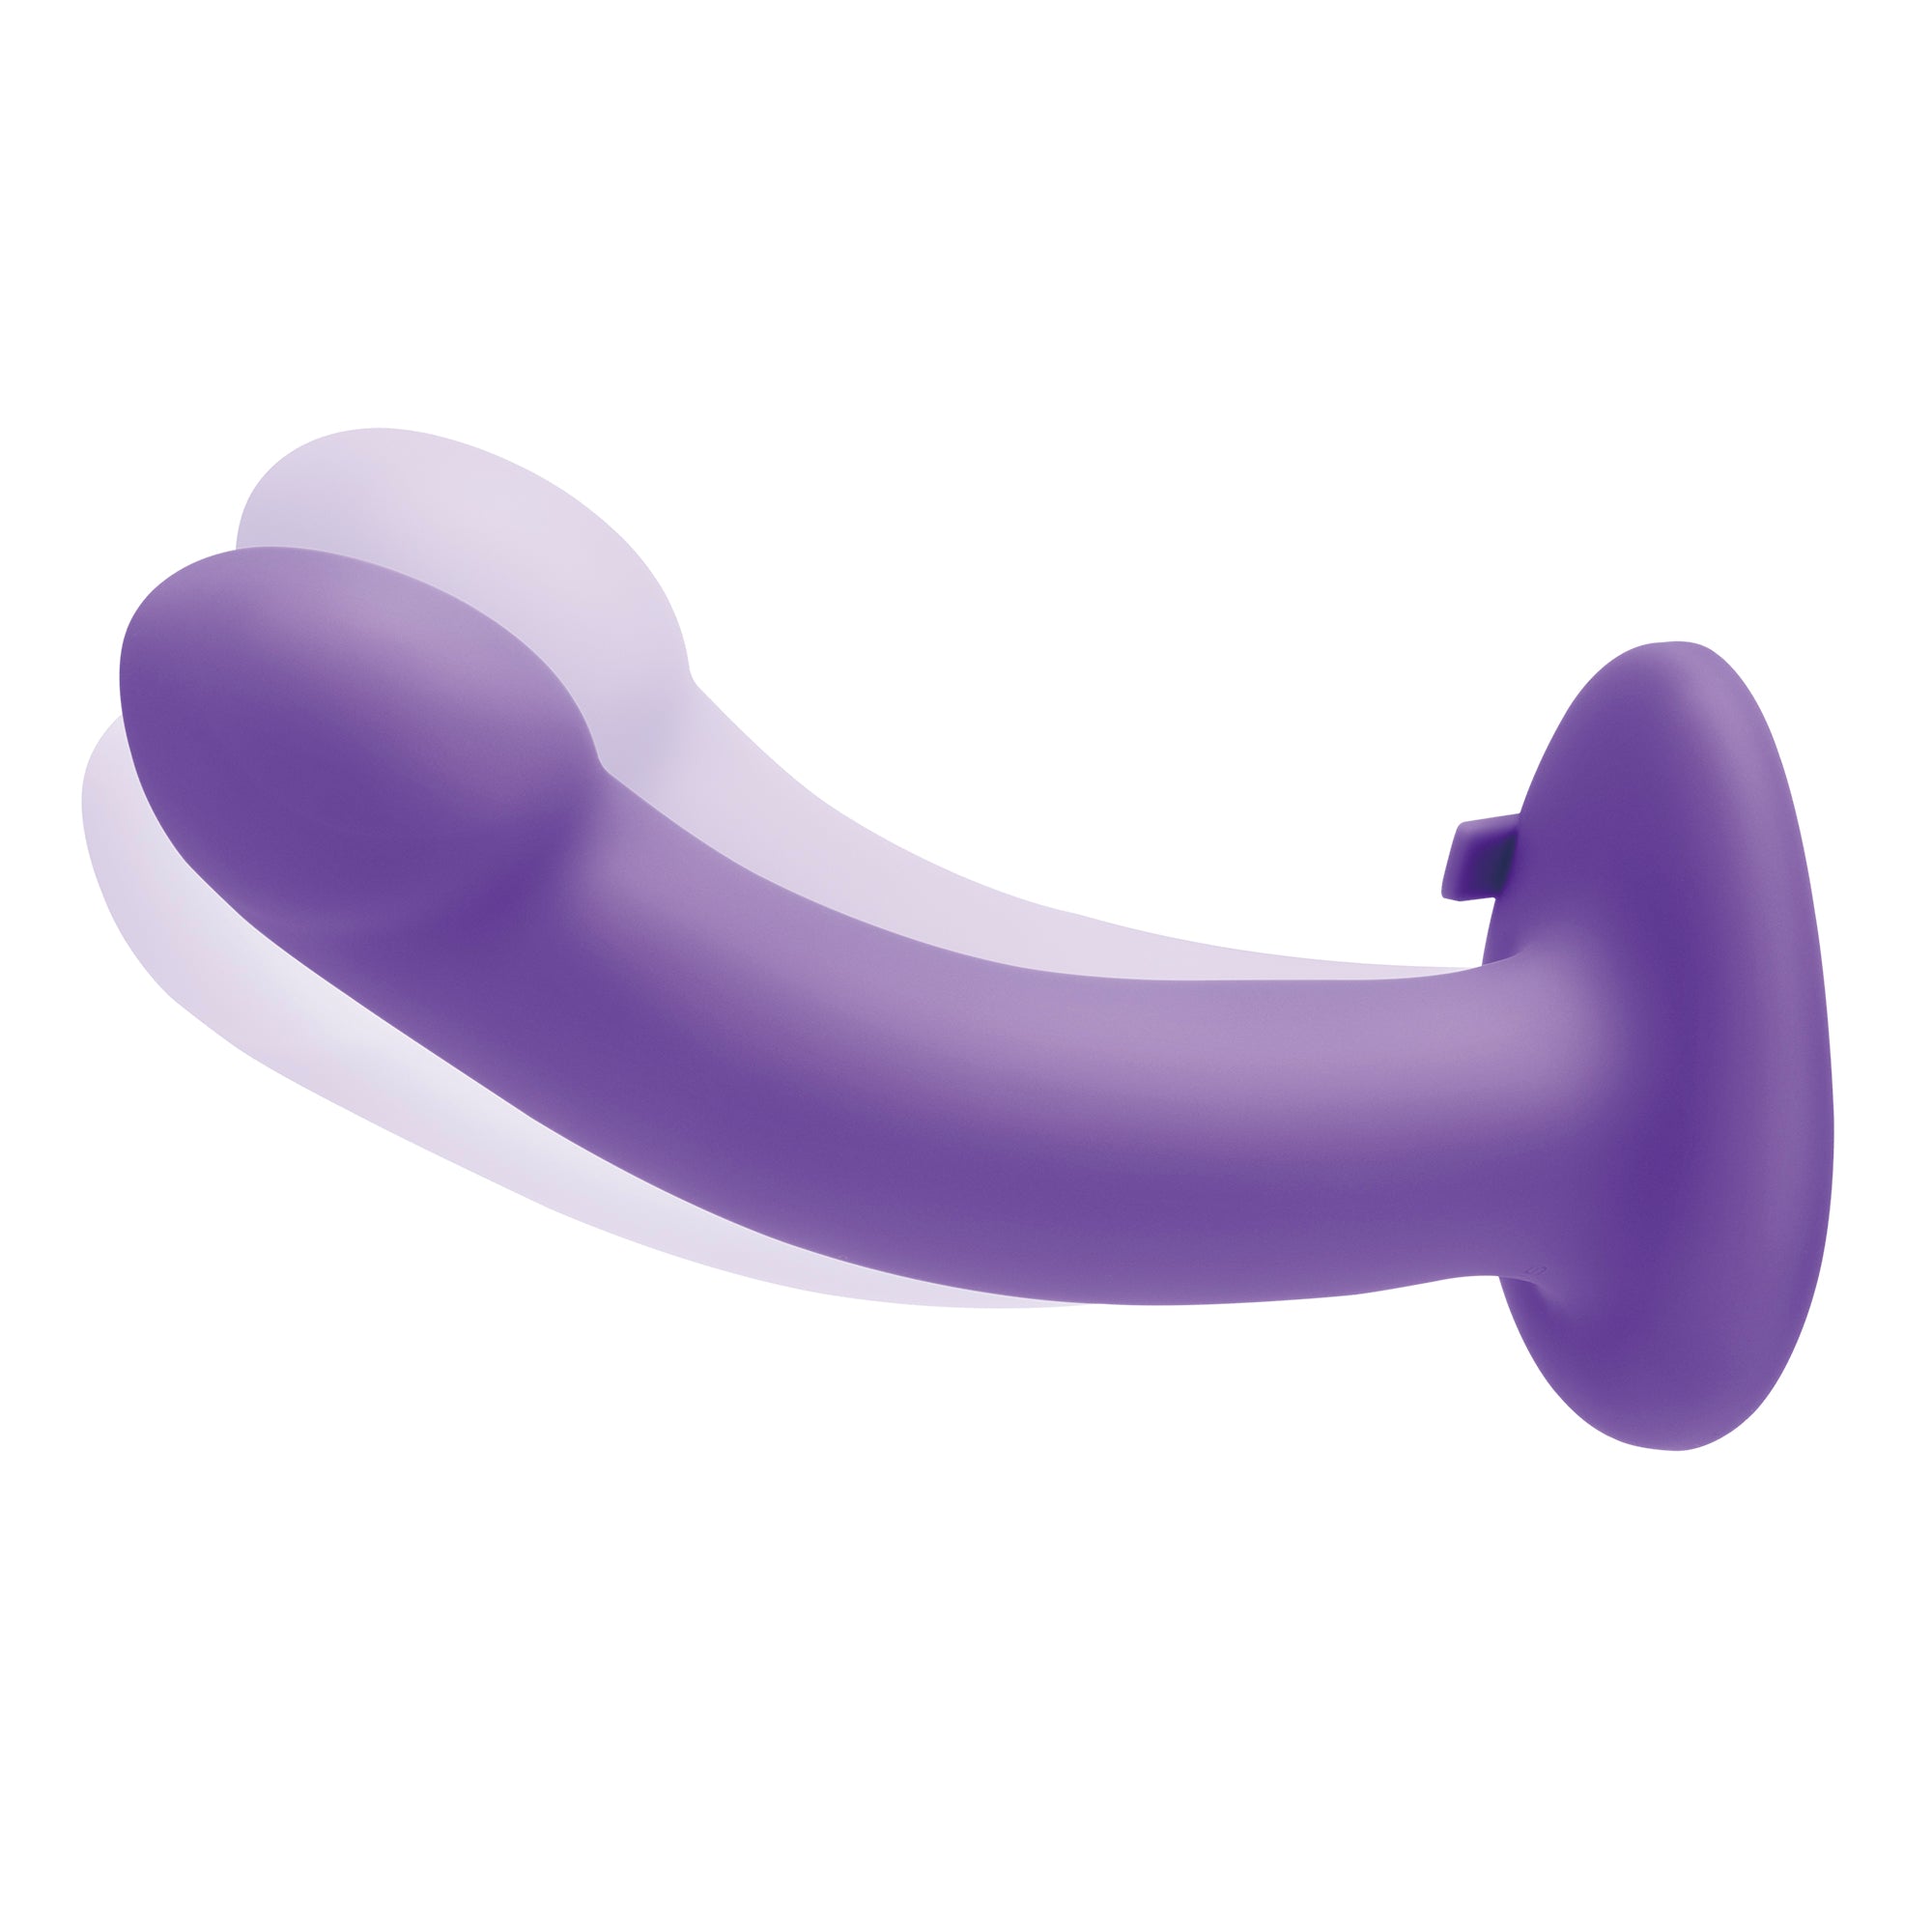 PEGASUS 6 Inches Curved Realistic Silicone Pegging Dildo with Adjustable Strap On